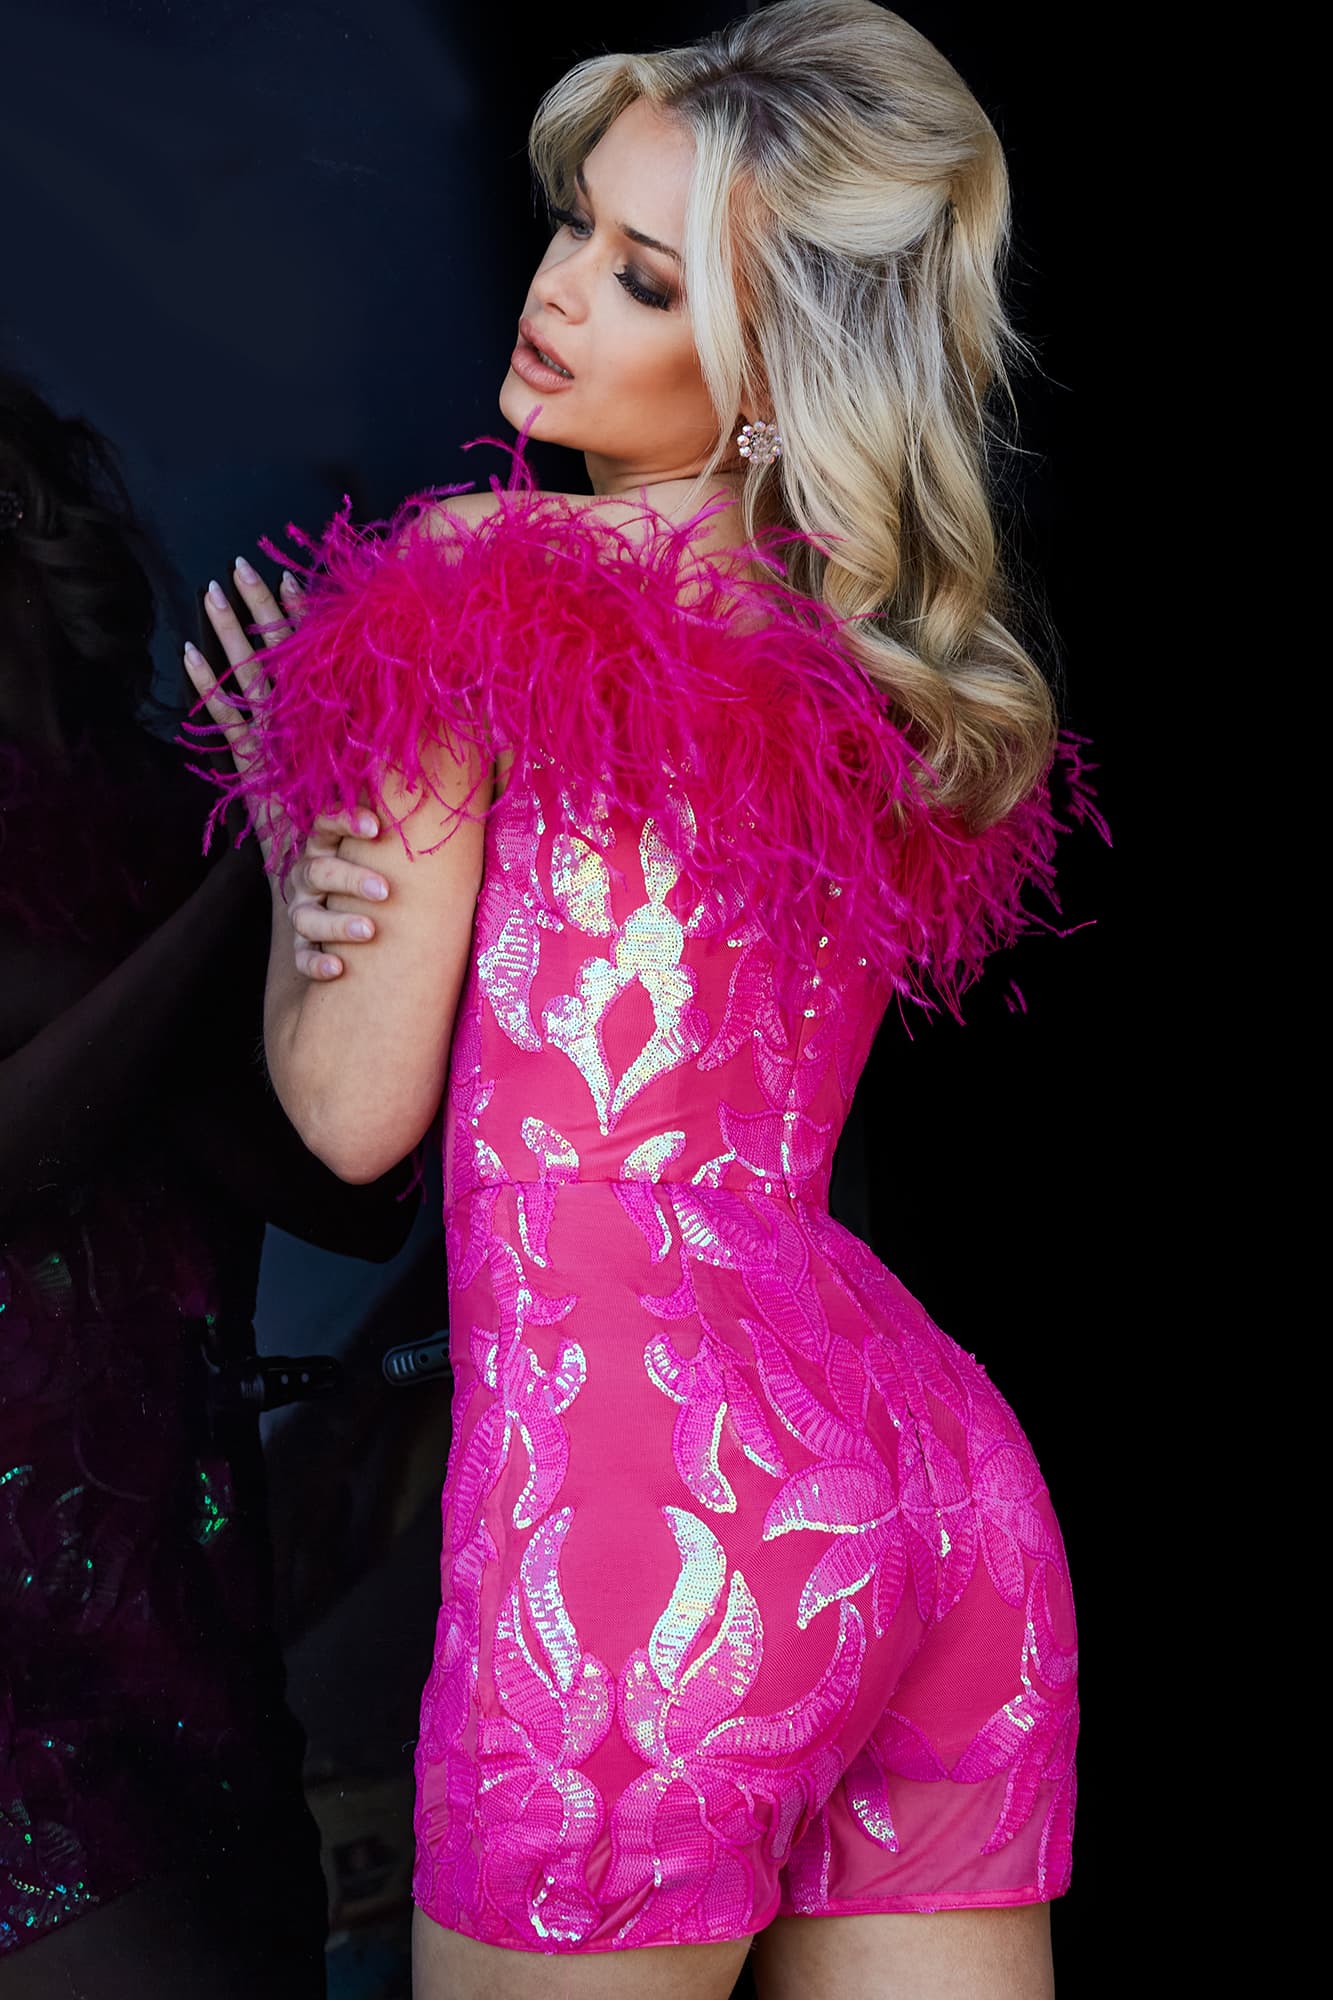 Jovani 22349 Sequin off the shoulder Feather Pageant Romper Fun Fashion Formal Wear  Form fitting sequin embellished hot pink homecoming romper 22349 features shorts and off the shoulder bodice with feather trim neckline.  Available Sizes: 00,0,2,4,6,8,10,12,14,16,18,20,22,24  Available Colors: Black, Hot Pink, Light Blue, White